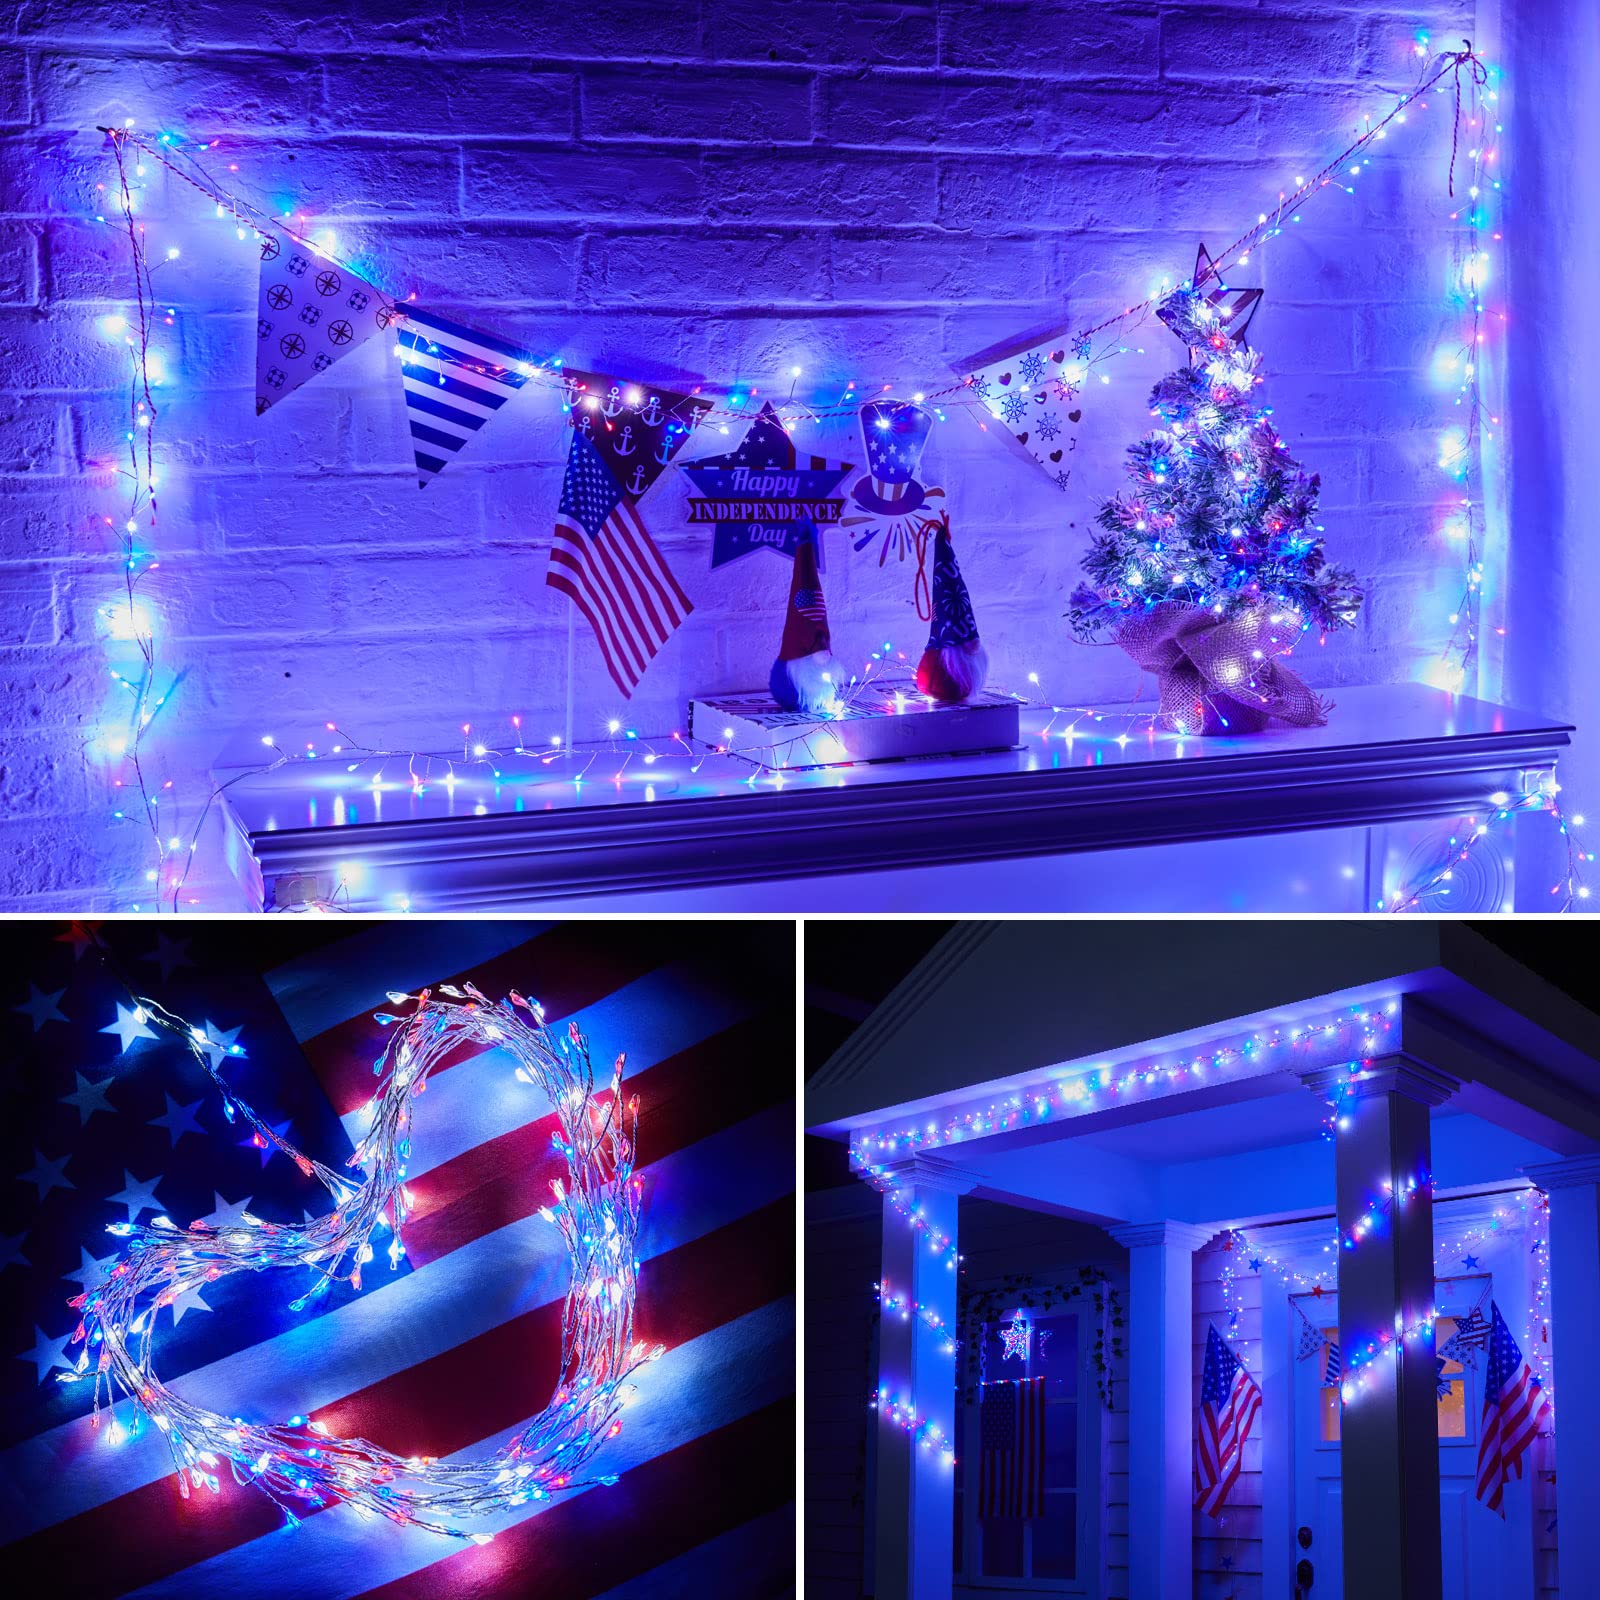 1 x 10 Feet / 200 LED / Red White Blue / Silver Wire